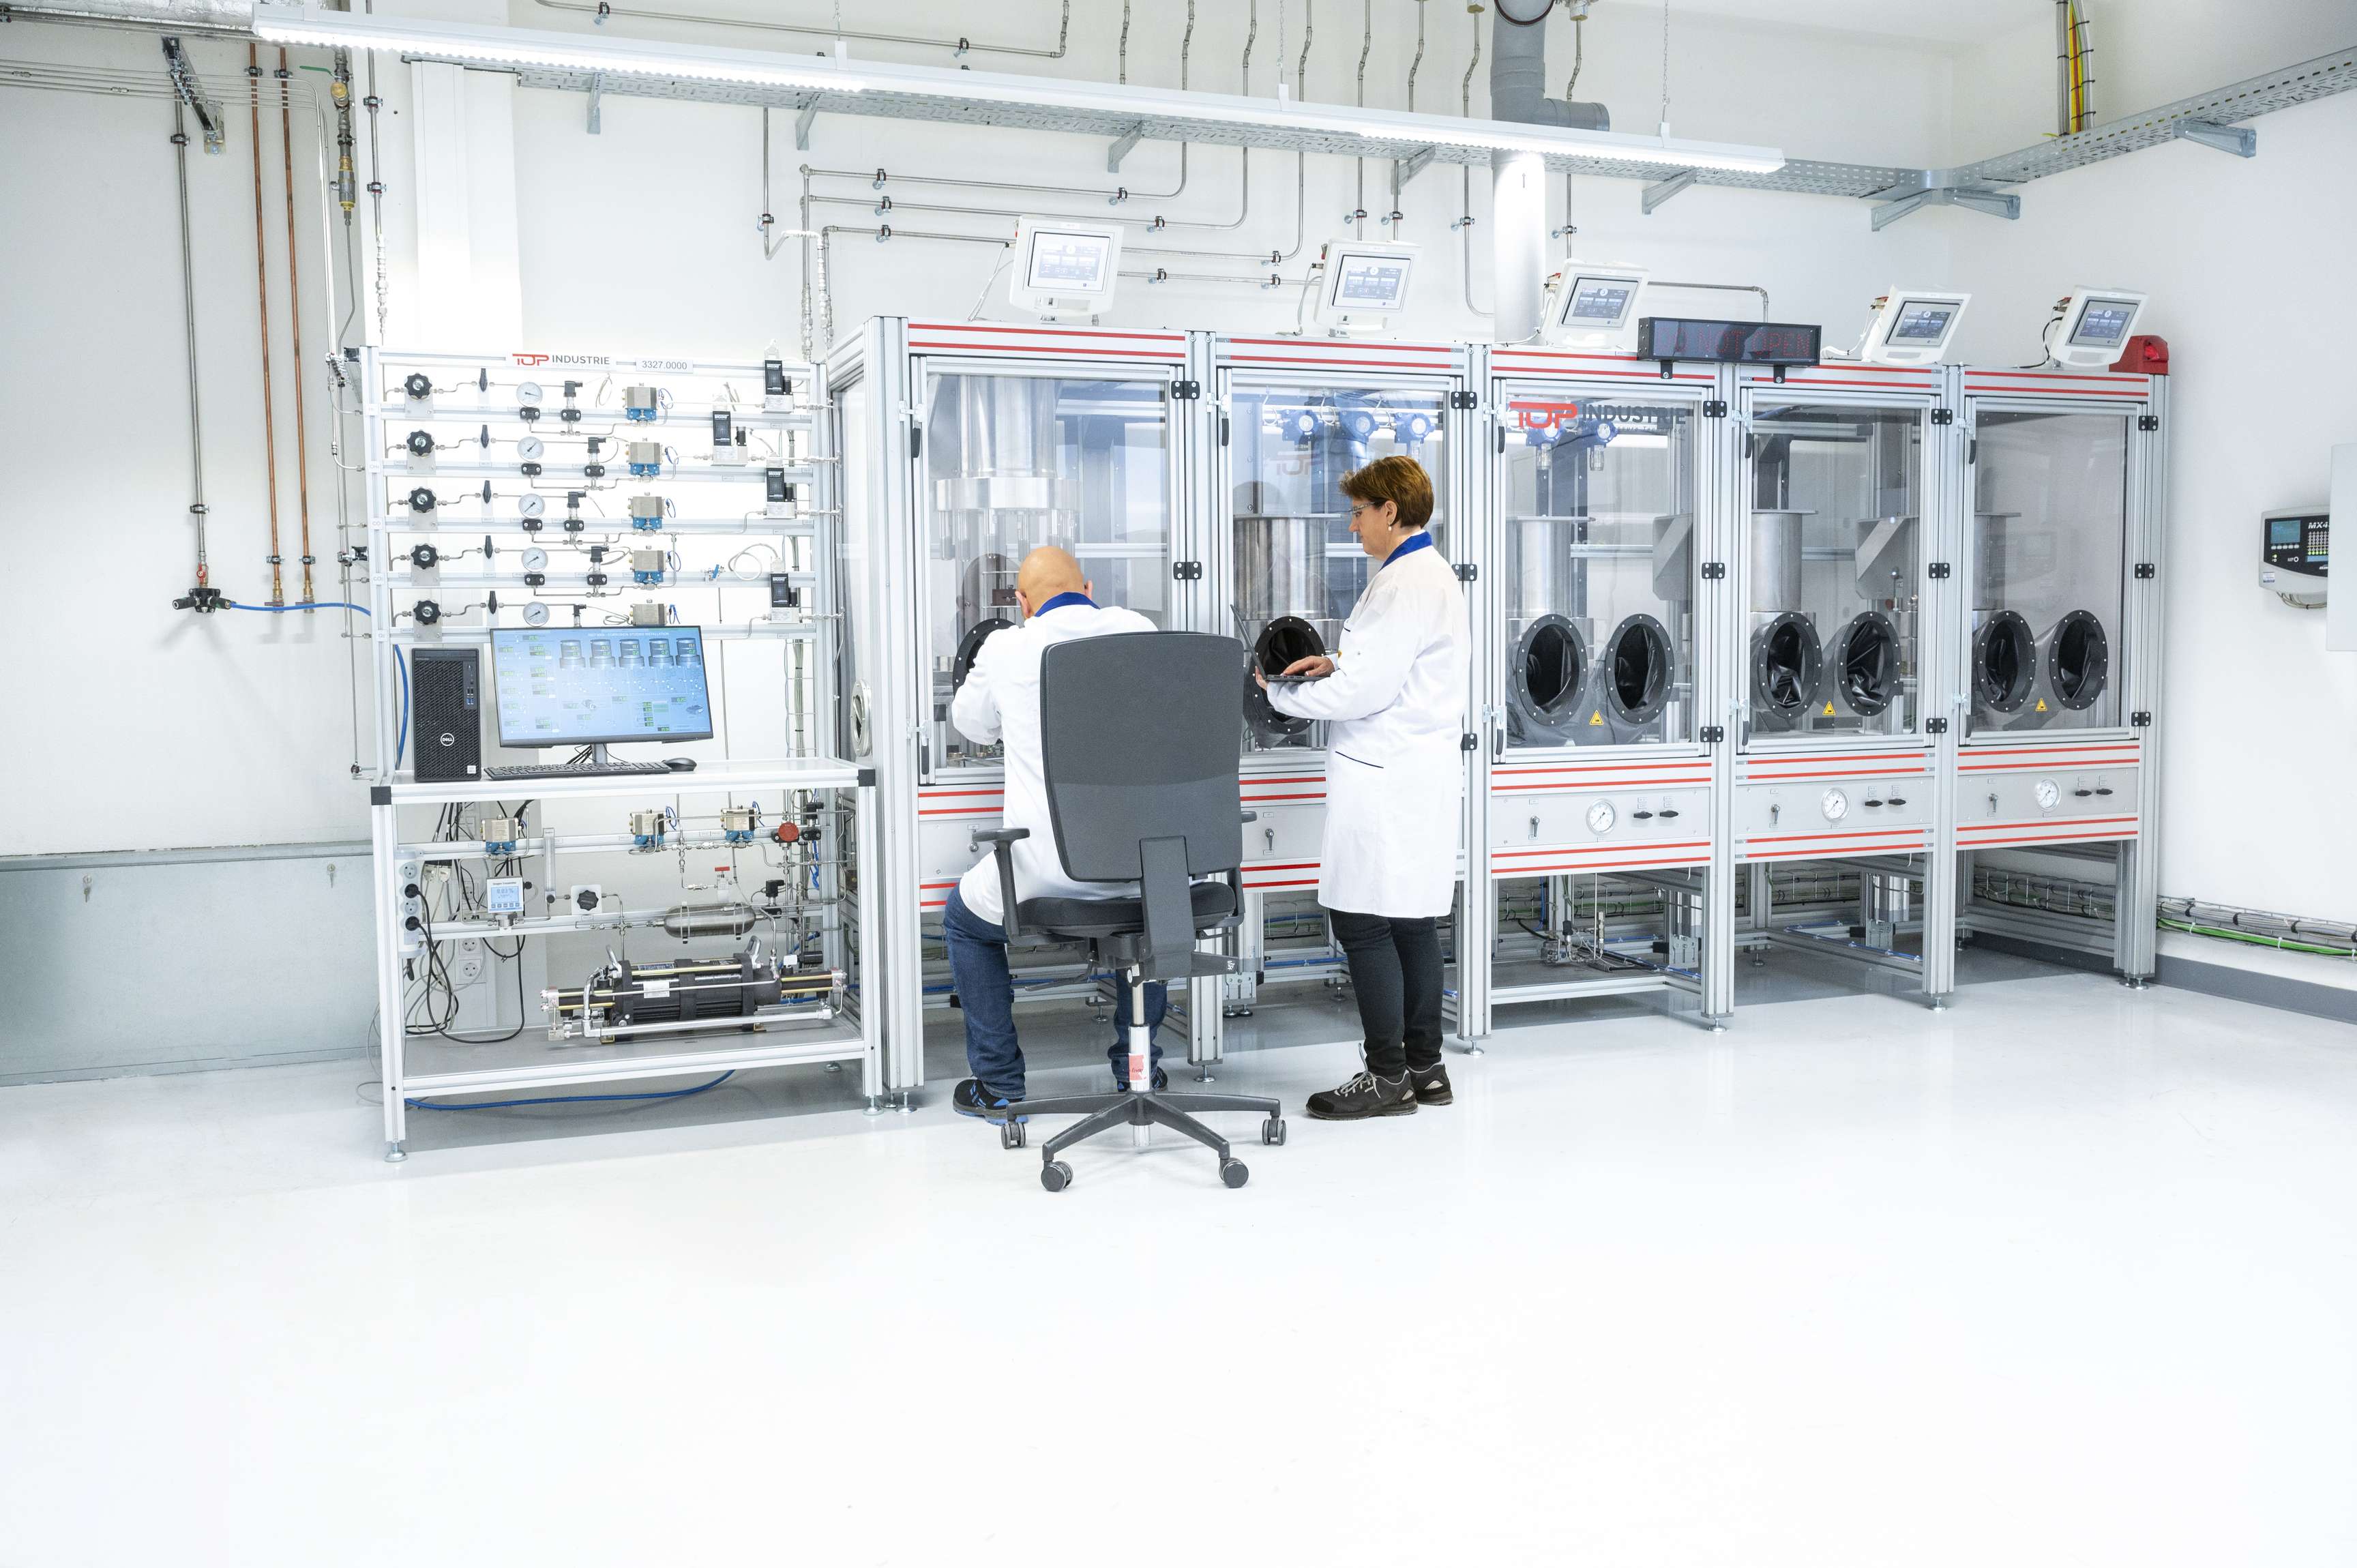 Image of a hydrogen testing lab with a man sitting and a woman standing with laptop in hand in front of the testing machines.